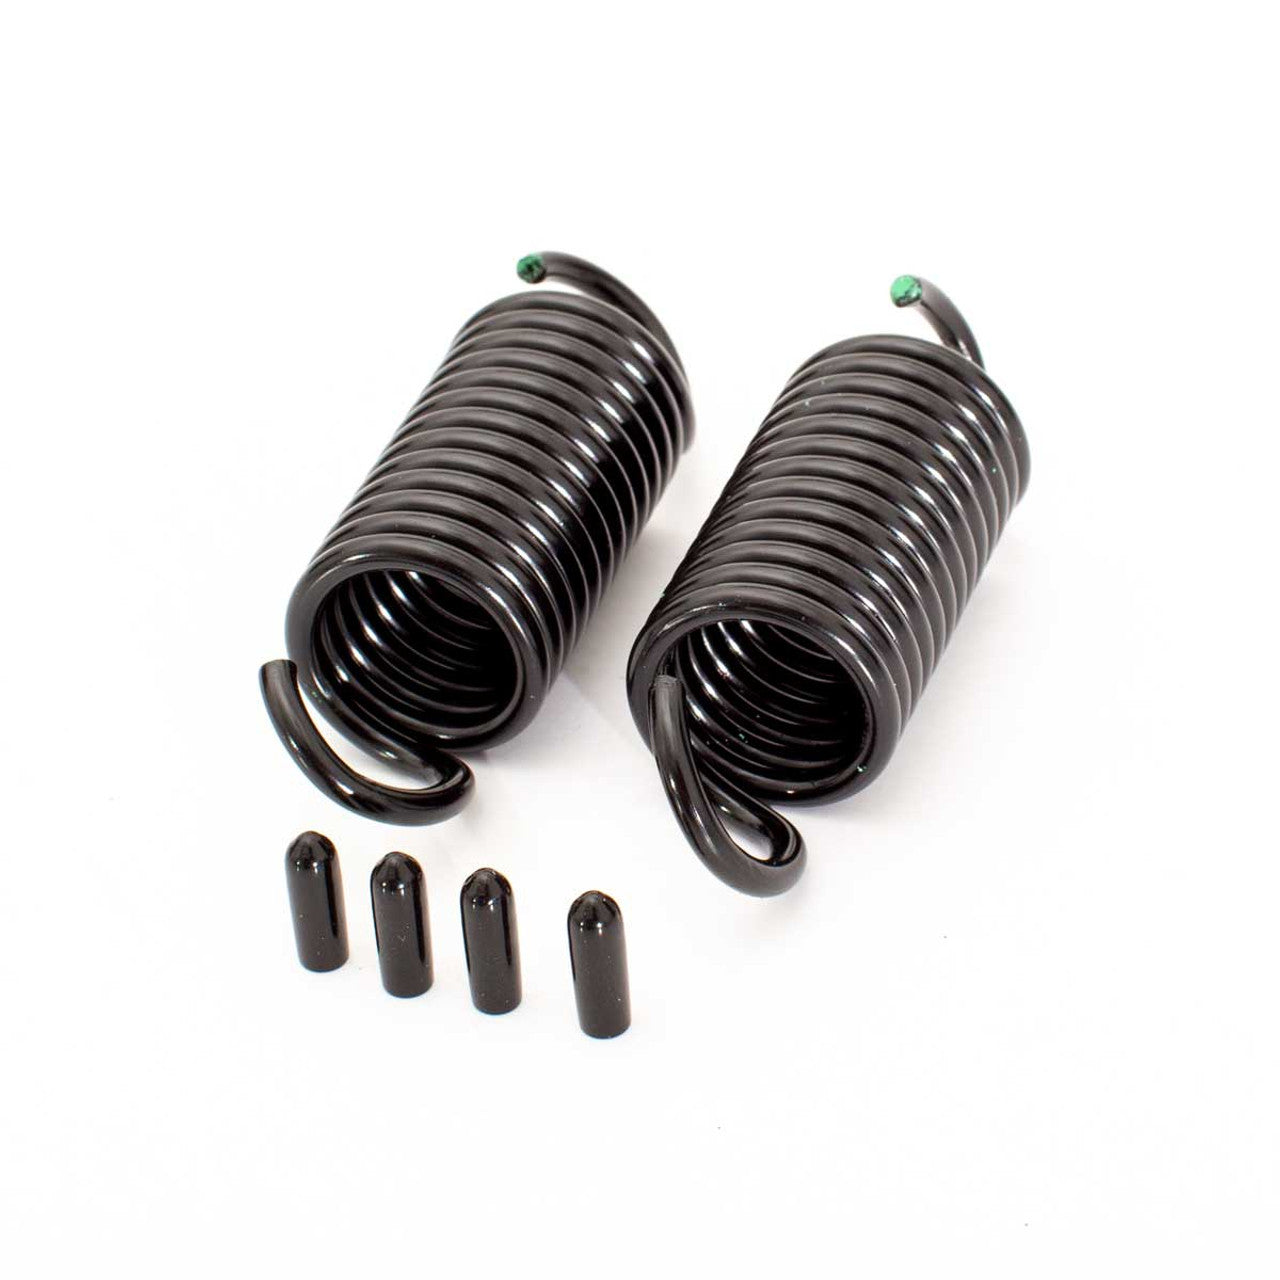 Replacement Band Springs - Set of 2